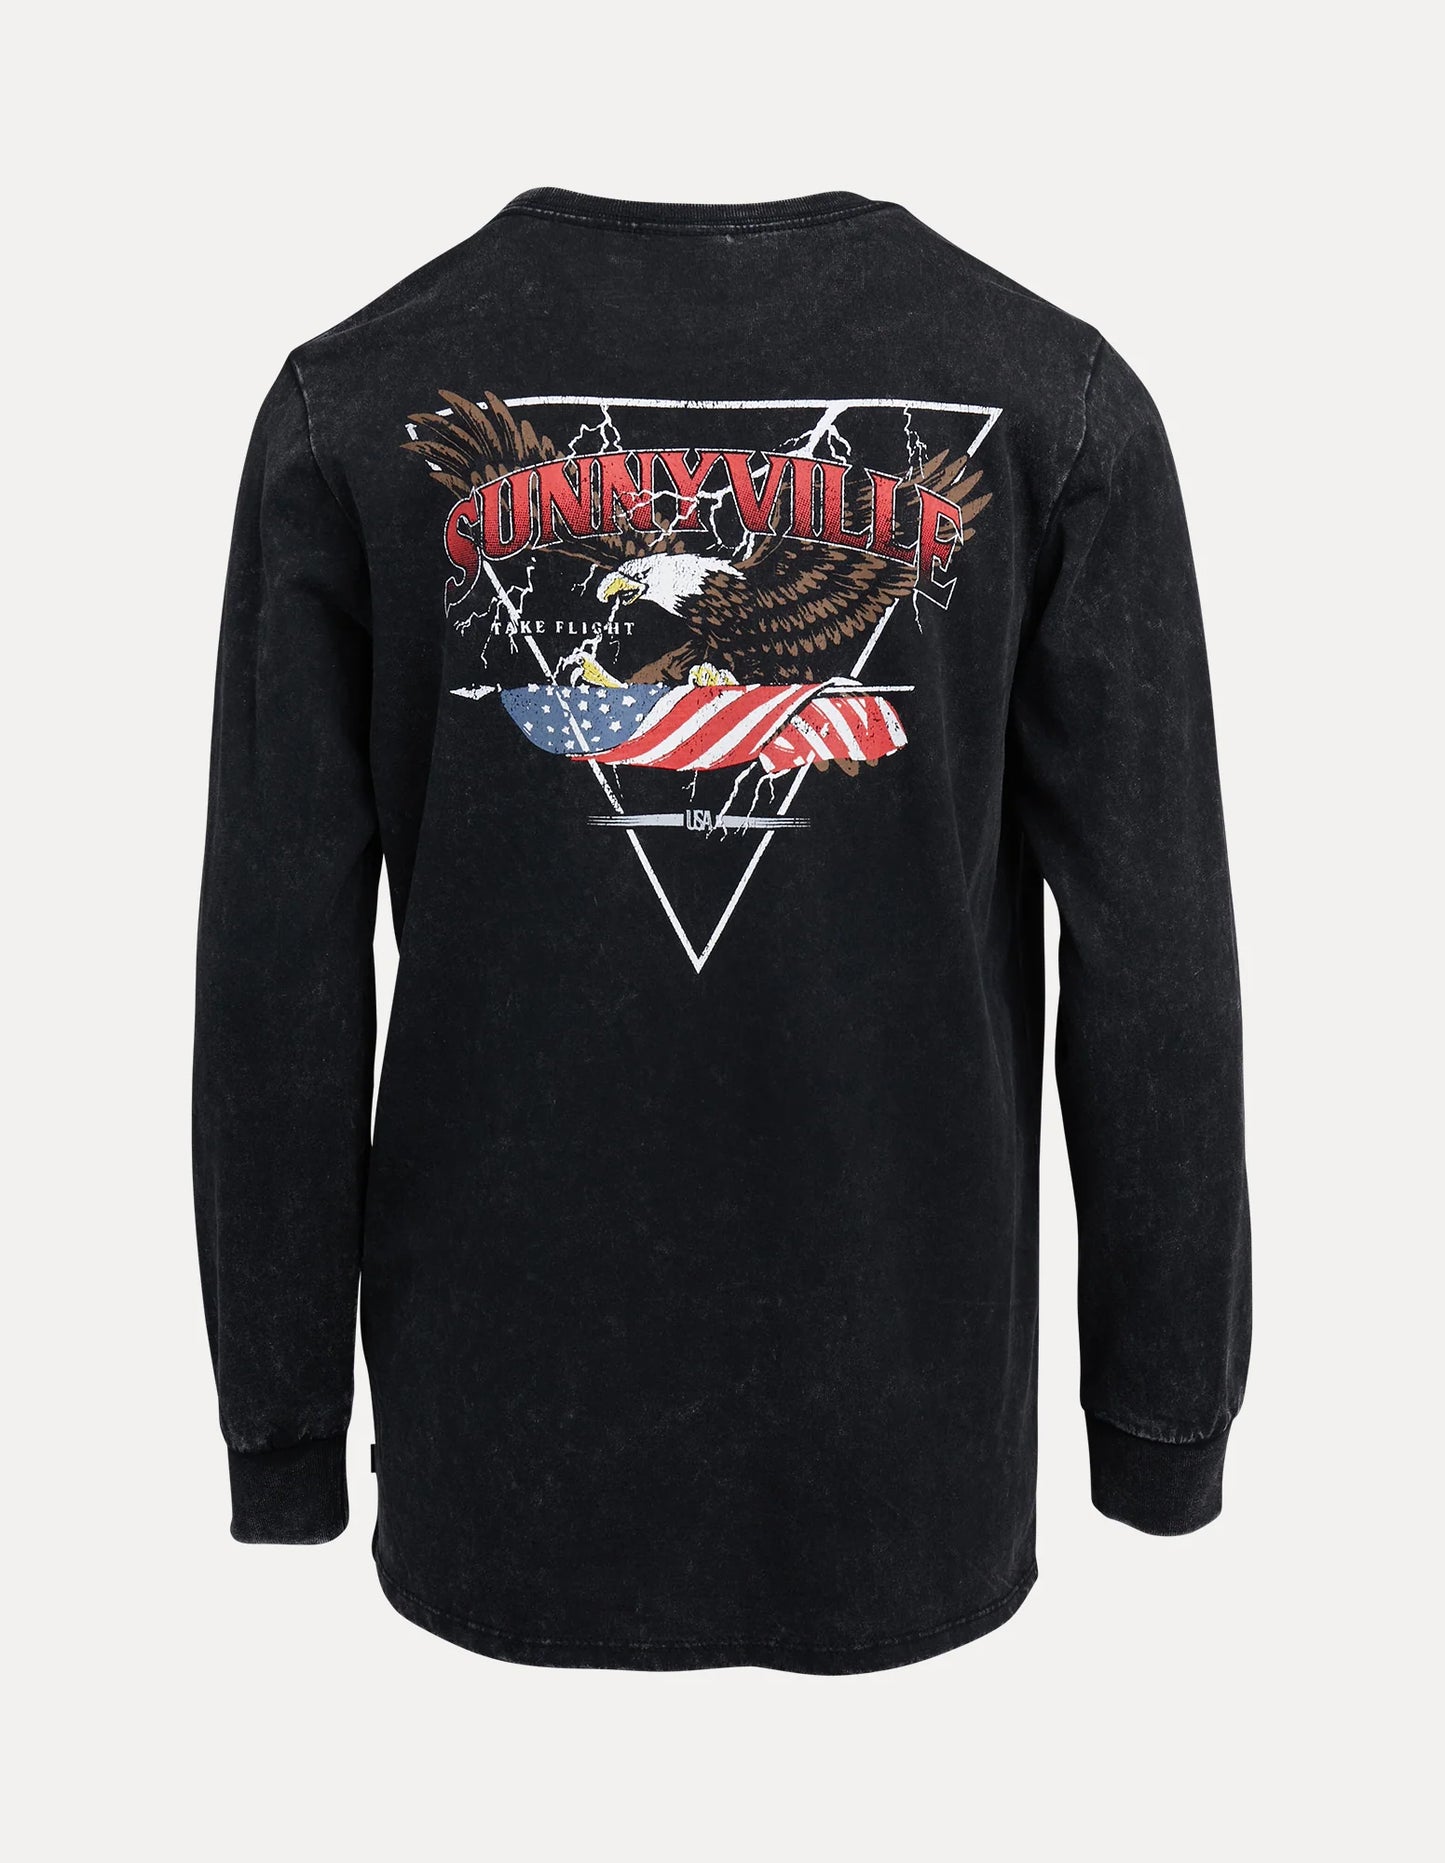 Sunnyville American Eagle L/S Tee - Washed Black